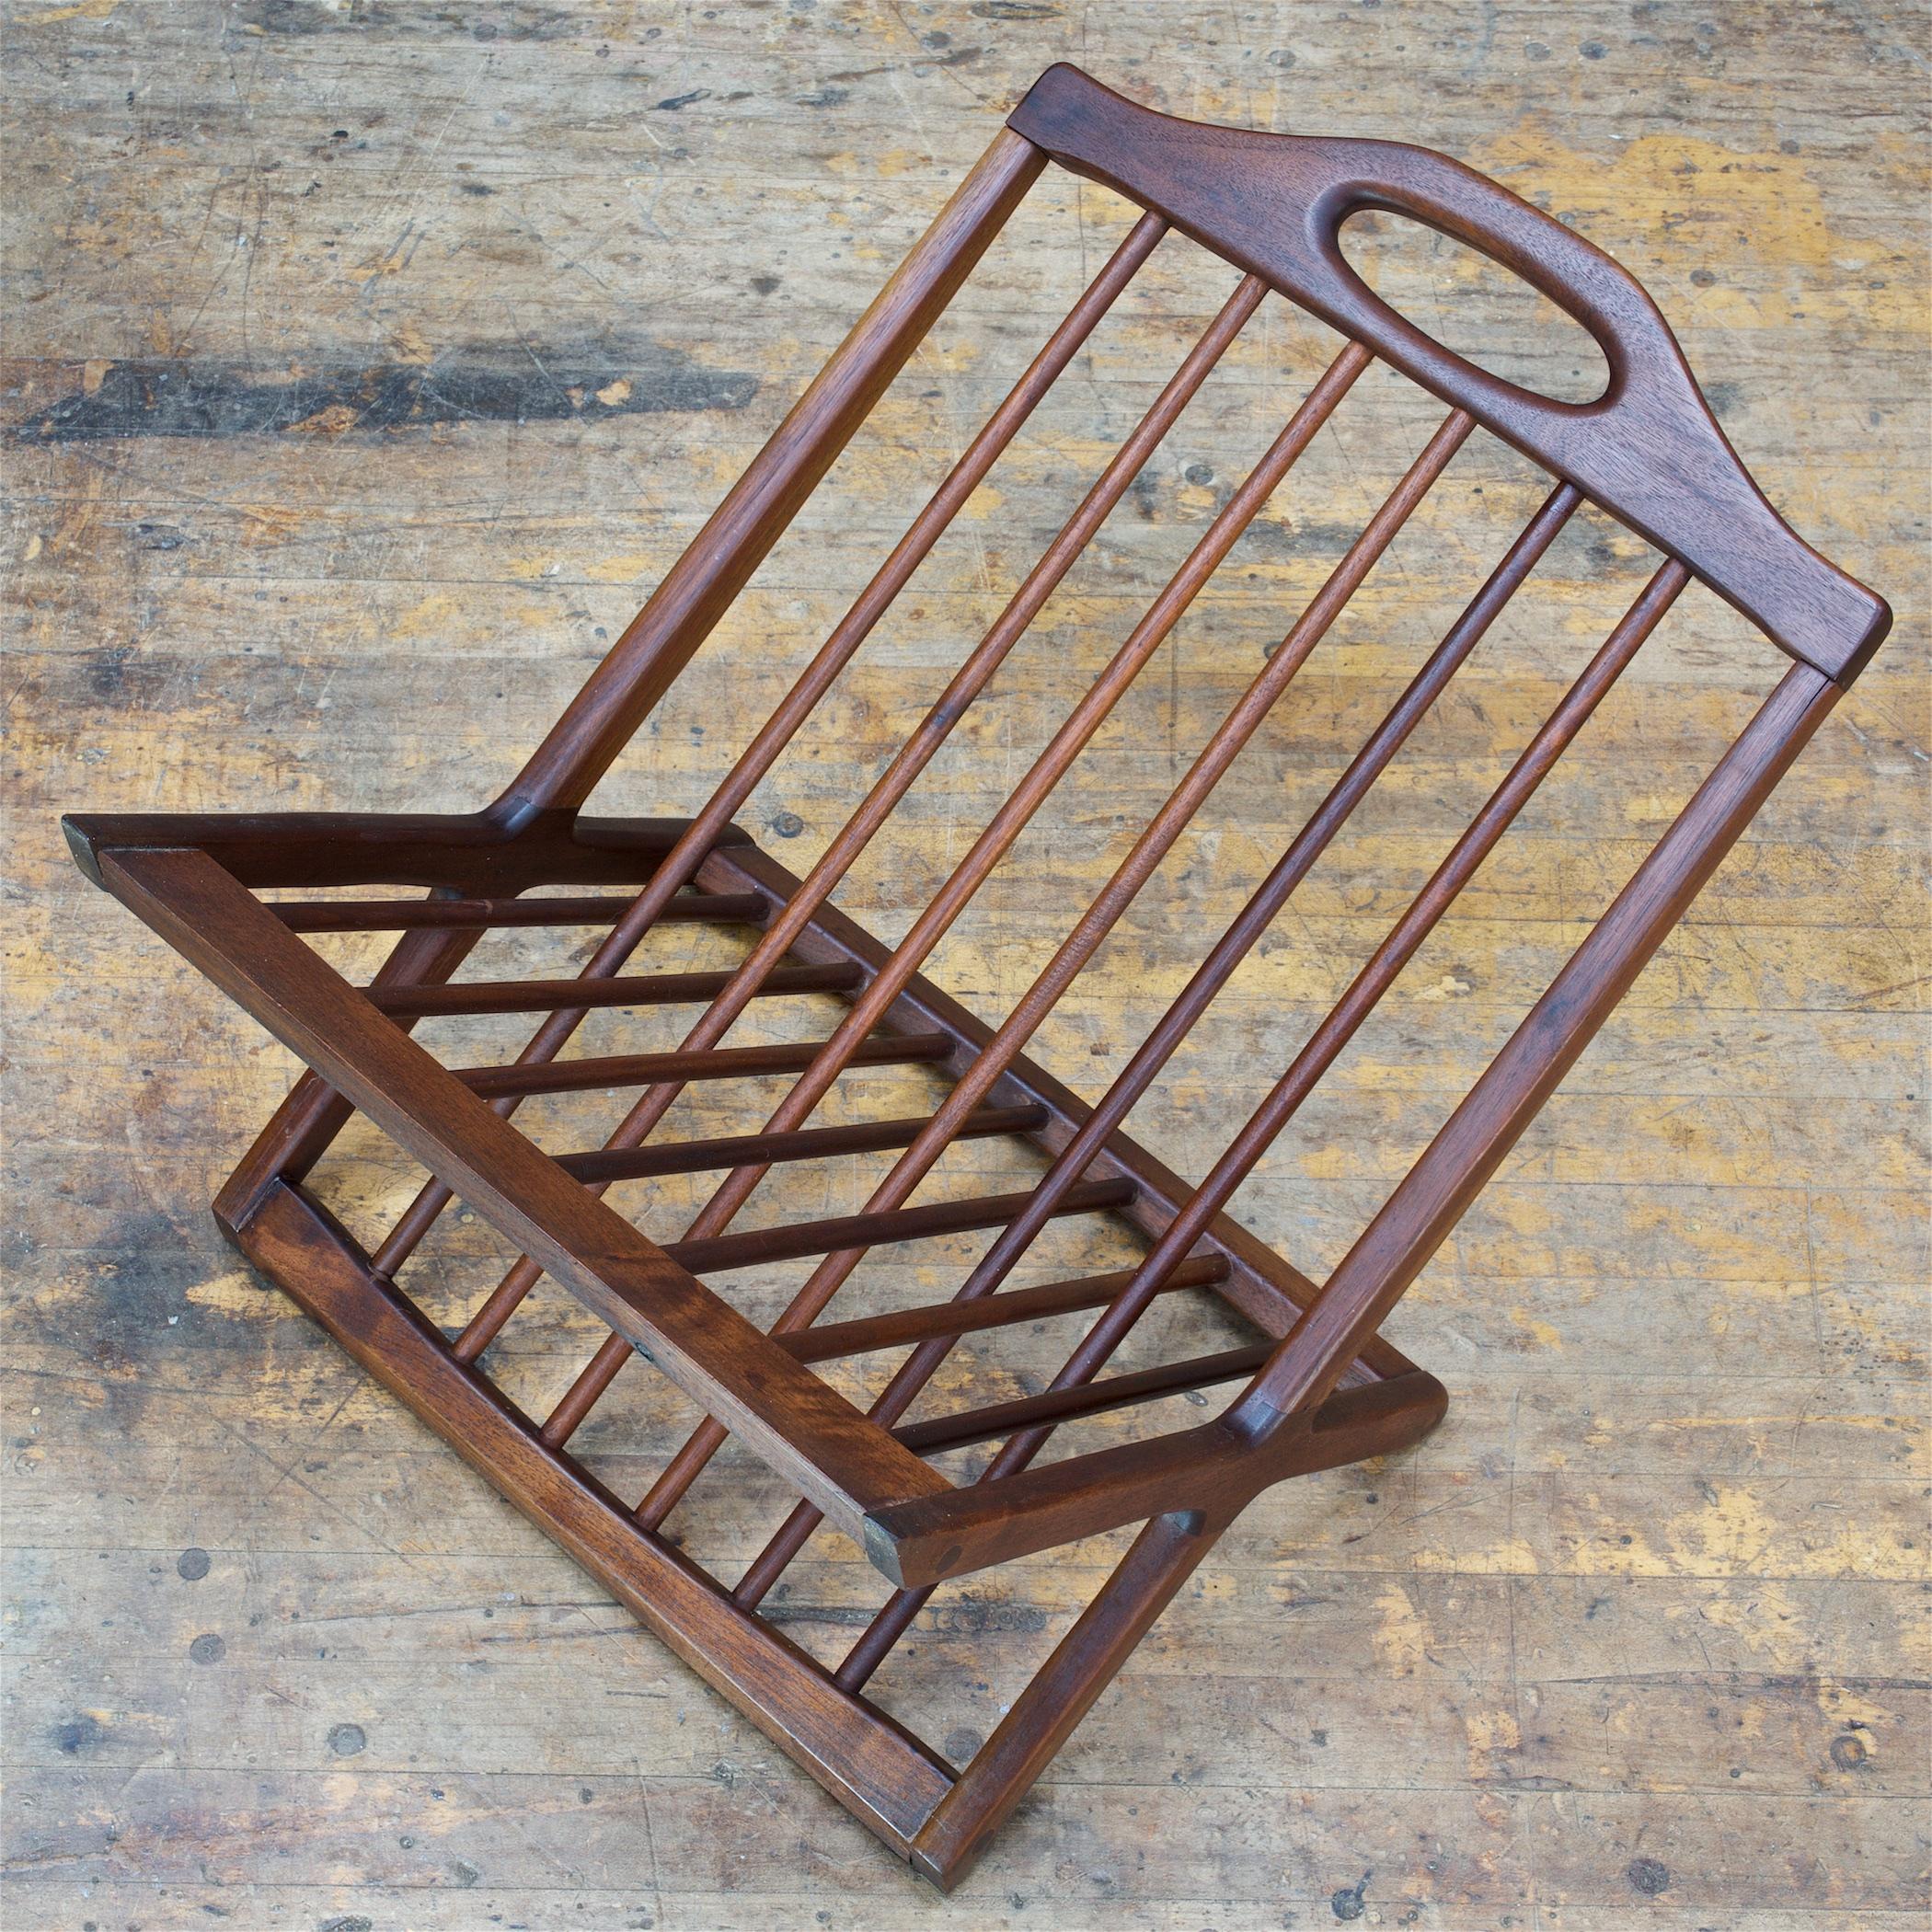 1950s Craftsman Architect Walnut Spoked and Somersaulting Magazine Paper Rack   In Fair Condition For Sale In Hyattsville, MD